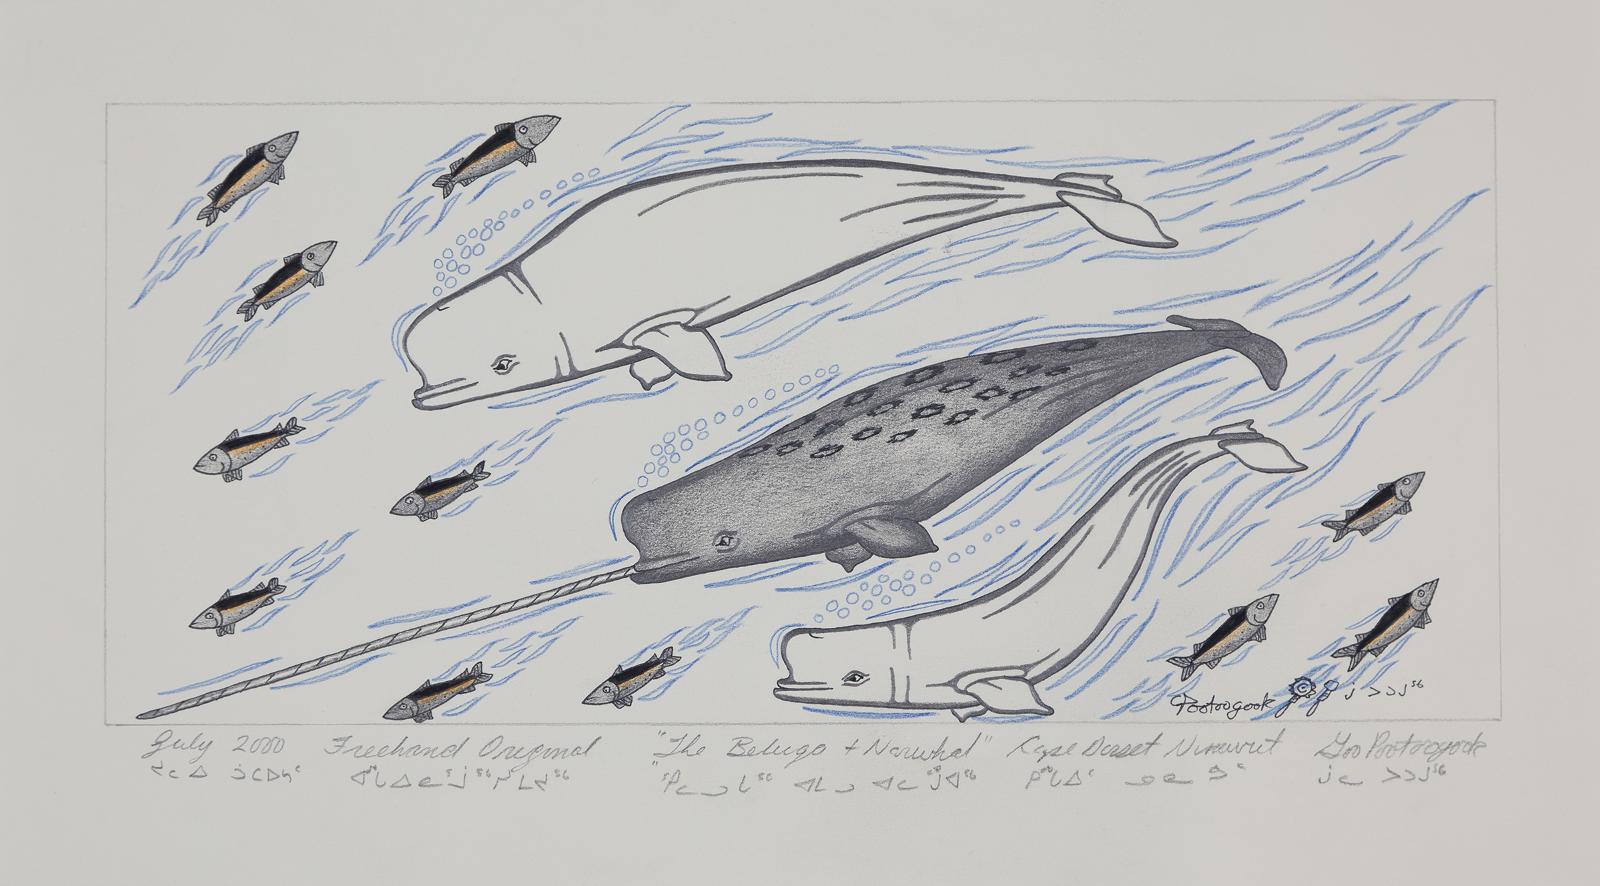 Goo Pootoogook (1957) - Three Works; The Beluga And Narwhal; The Shaman; Mother Bear And Cubs